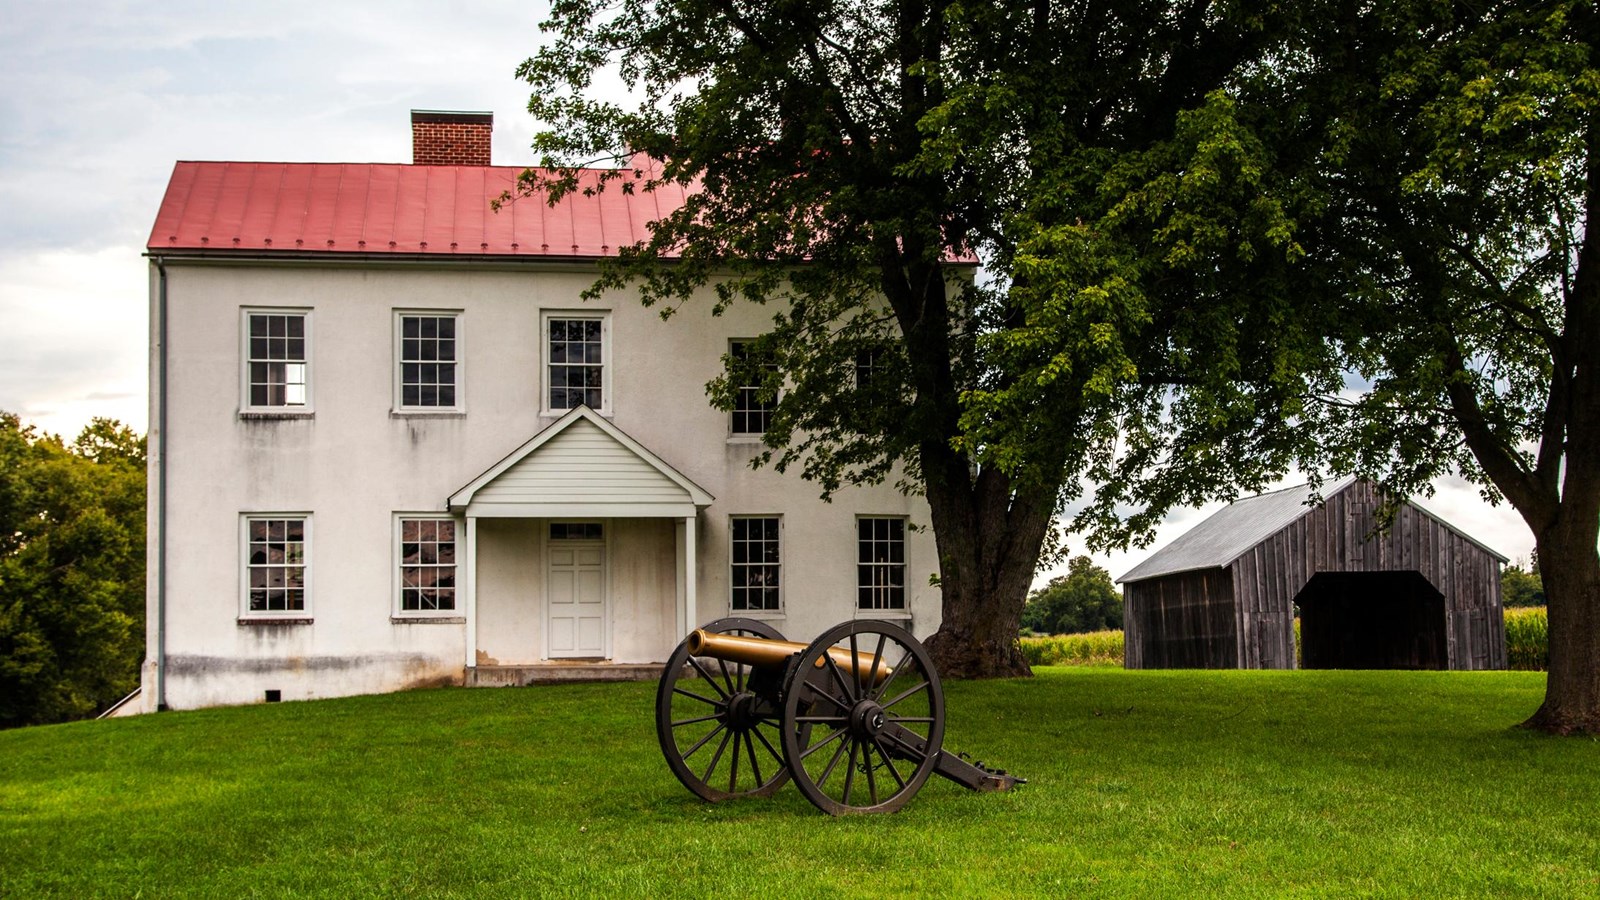 A two-story white farmhouse with a cannon in front and a farm building to the right.